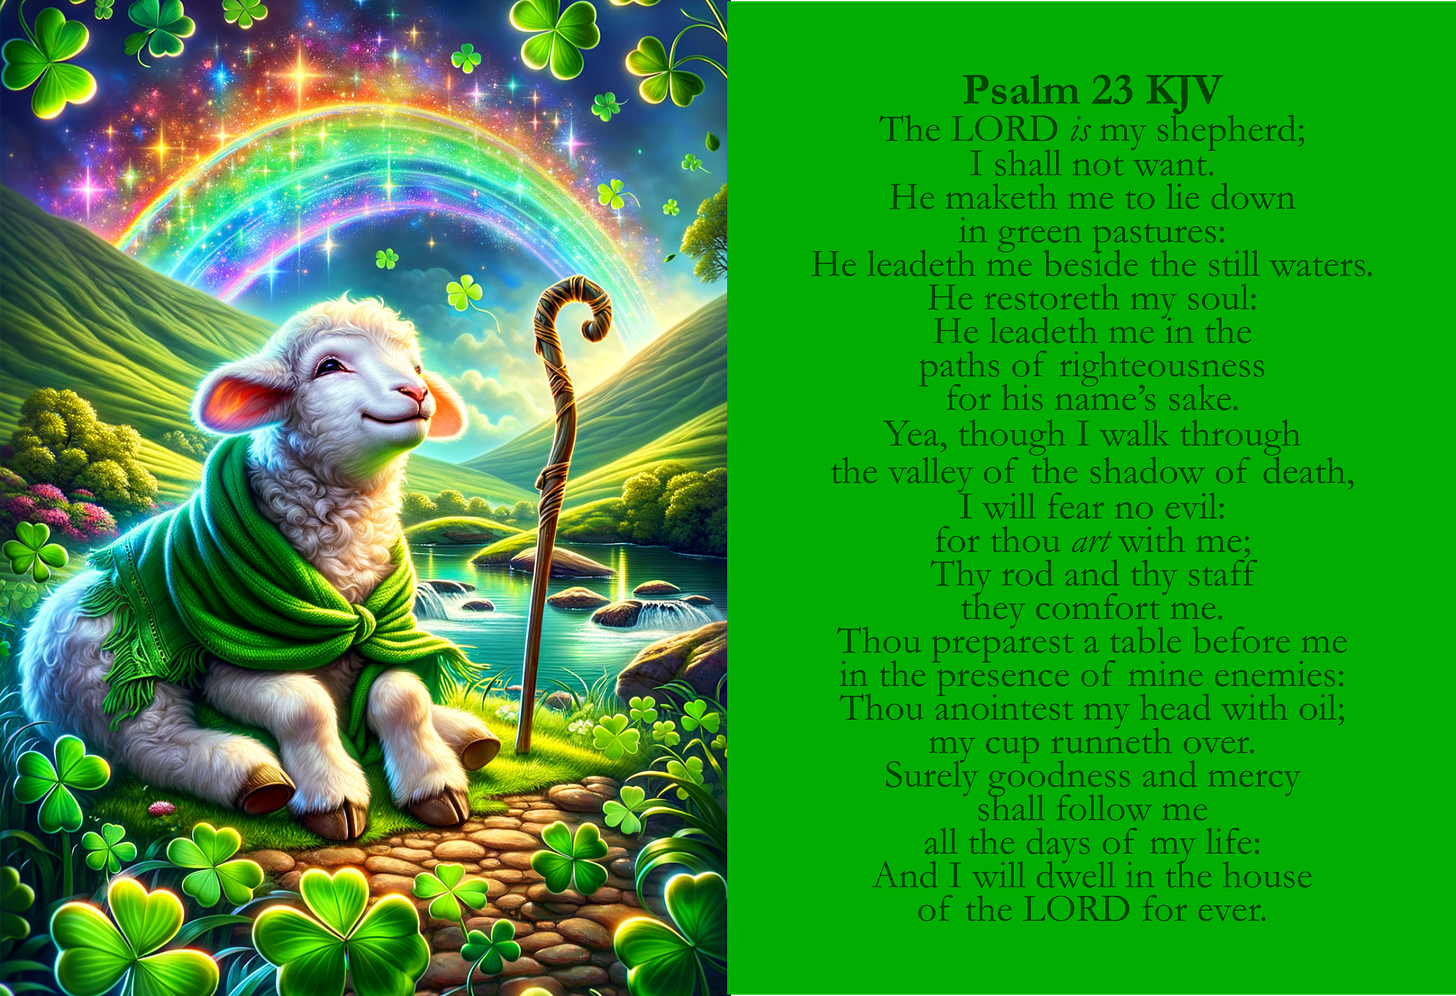 This is a vibrant and colorful image divided into two main sections. On the left side, there is a detailed illustration, and on the right side, there is text against a solid background.  The left side of the image features a whimsical, pastoral scene with a fantasy element. In the foreground, there is a young lamb sitting on a cobblestone path, adorned with a green scarf or shawl, looking content and slightly upwards with a gentle smile. The lamb is white with a hint of soft pink in its ears. Behind the lamb, there's a shepherd's crook, suggesting the theme of shepherding.  The background displays an idyllic landscape with lush green hills, a variety of trees, and a serene river flowing through the valleys, creating small waterfalls. There are four-leaf clovers scattered across the foreground, symbolizing luck. A rainbow arcs across the sky, composed of stars and nebula-like colors, adding a celestial and magical touch to the scene. The sky transitions from a bright, daylight blue near the horizon to a darker, space-like upper area adorned with stars.  The right side of the image shows a block of text, which is the text of Psalm 23 from the King James Version (KJV) of the Bible. The text is formatted in a clear, serif font, and is set against a green background that matches the scarf of the lamb. The color of the text is a golden-yellow, which harmonizes with the color scheme of the left side of the image. The text outlines the psalm in a structured manner, with line breaks and indentations that emphasize the poetic nature of the scripture.  The overall impression of the image is one of peace, comfort, and a sense of divine presence or protection, as suggested by the content of Psalm 23 and the protective imagery of the shepherd's crook and the lamb. The fantastical elements, like the starry rainbow, imbue the image with a sense of wonder and otherworldliness.